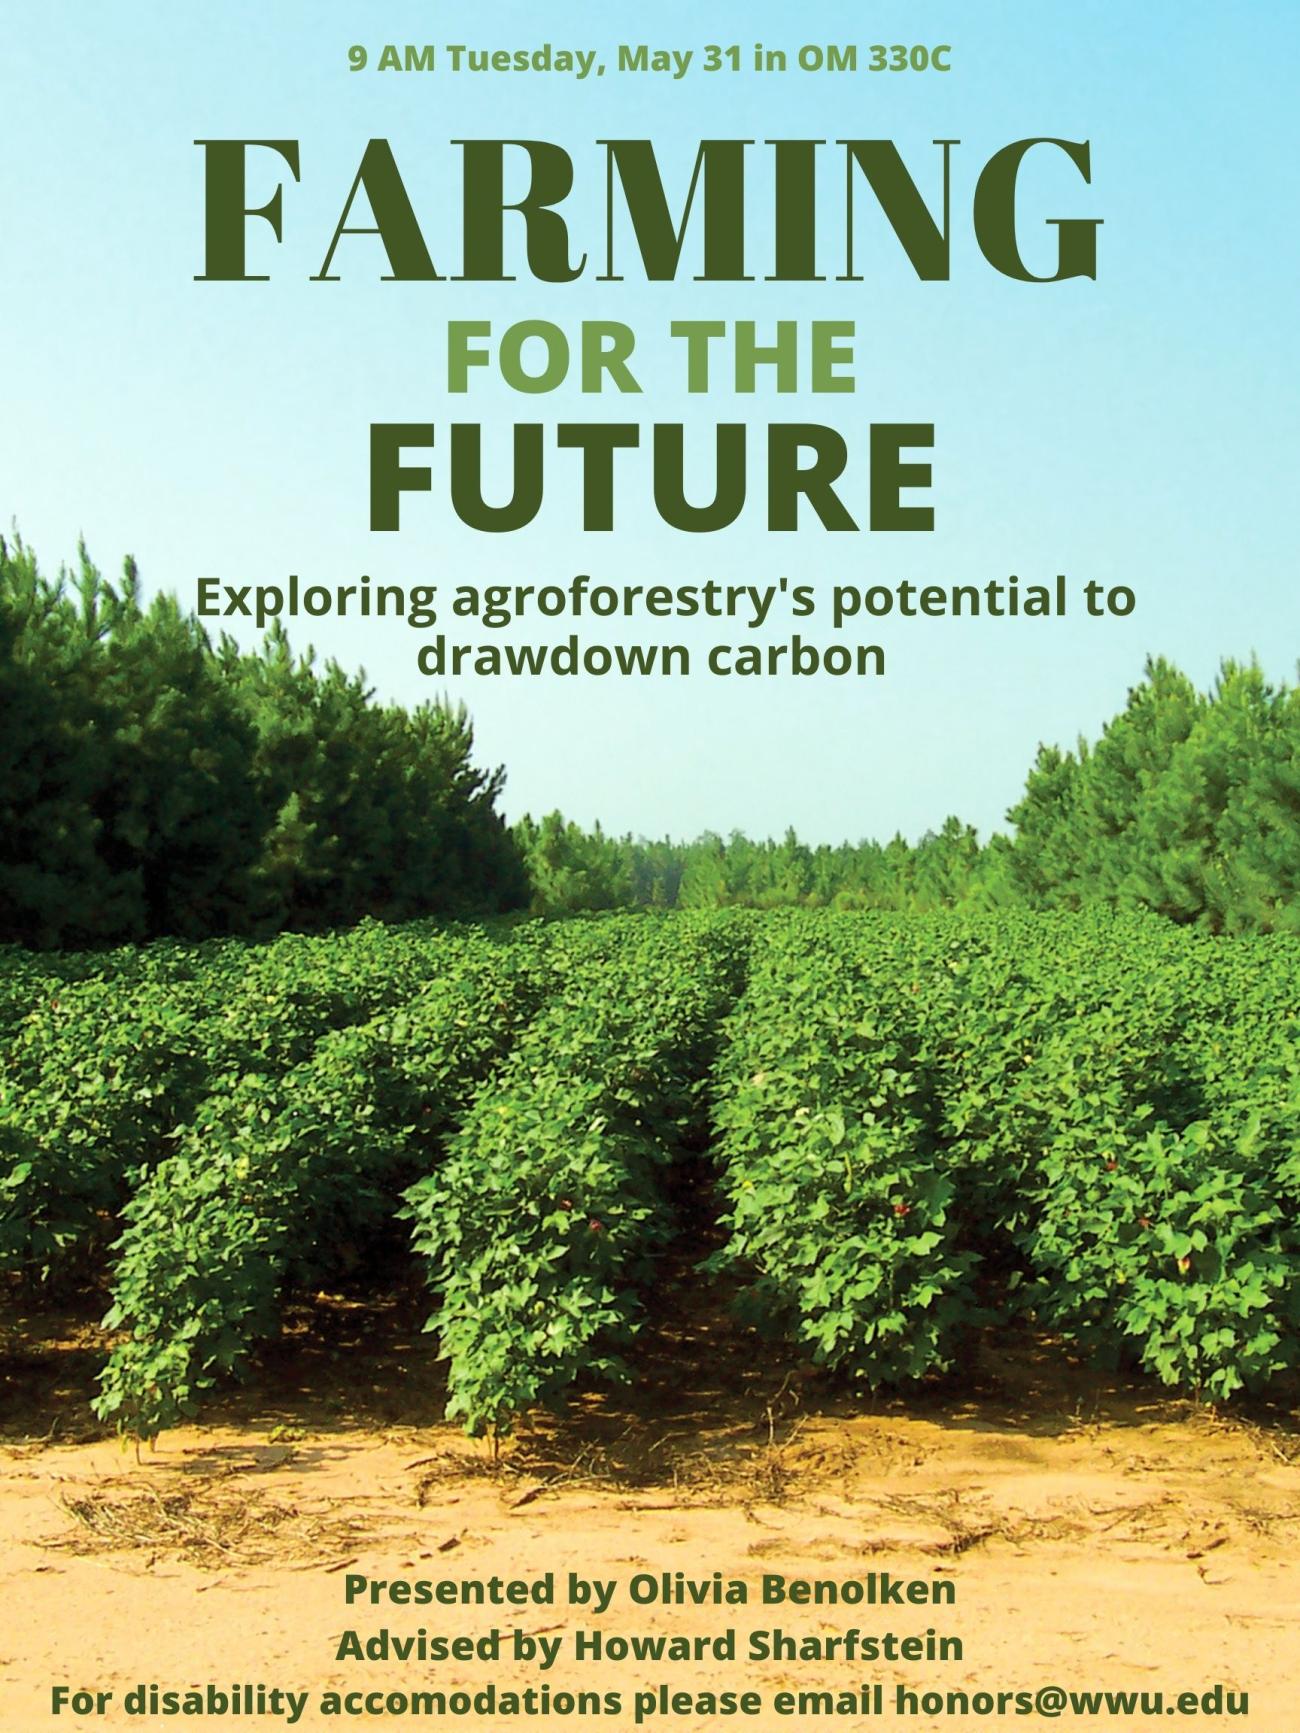 Background image is several rows of cotton with a single row of pine trees on each side. There is a light blue sky with the text: “Tuesday, May 31 at 9:00 am. Farming for the future. Exploring agroforestry’s potential to drawdown carbon.” At the bottom of the poster there is dirt with the text: “Presented by Olivia Benolken. Advised by Howard Sharfstein. For disability accommodations please email honors@wwu.edu”